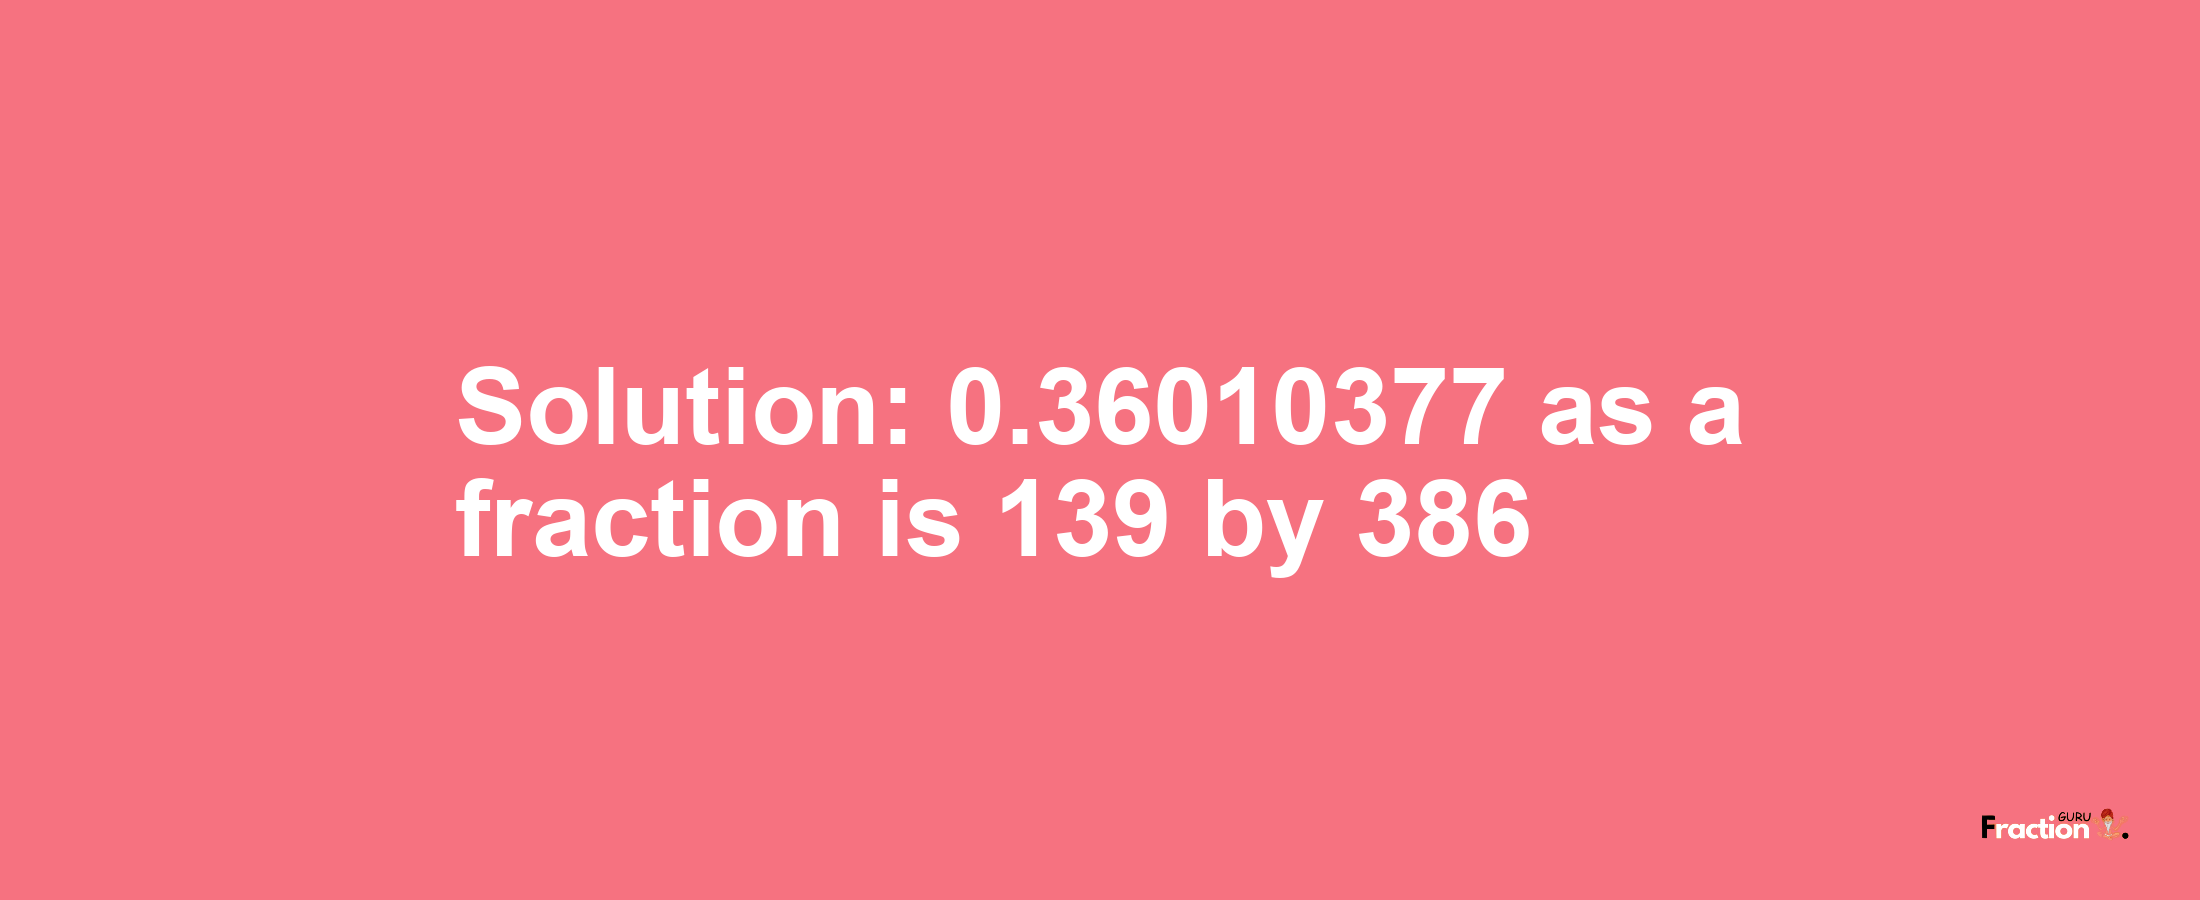 Solution:0.36010377 as a fraction is 139/386